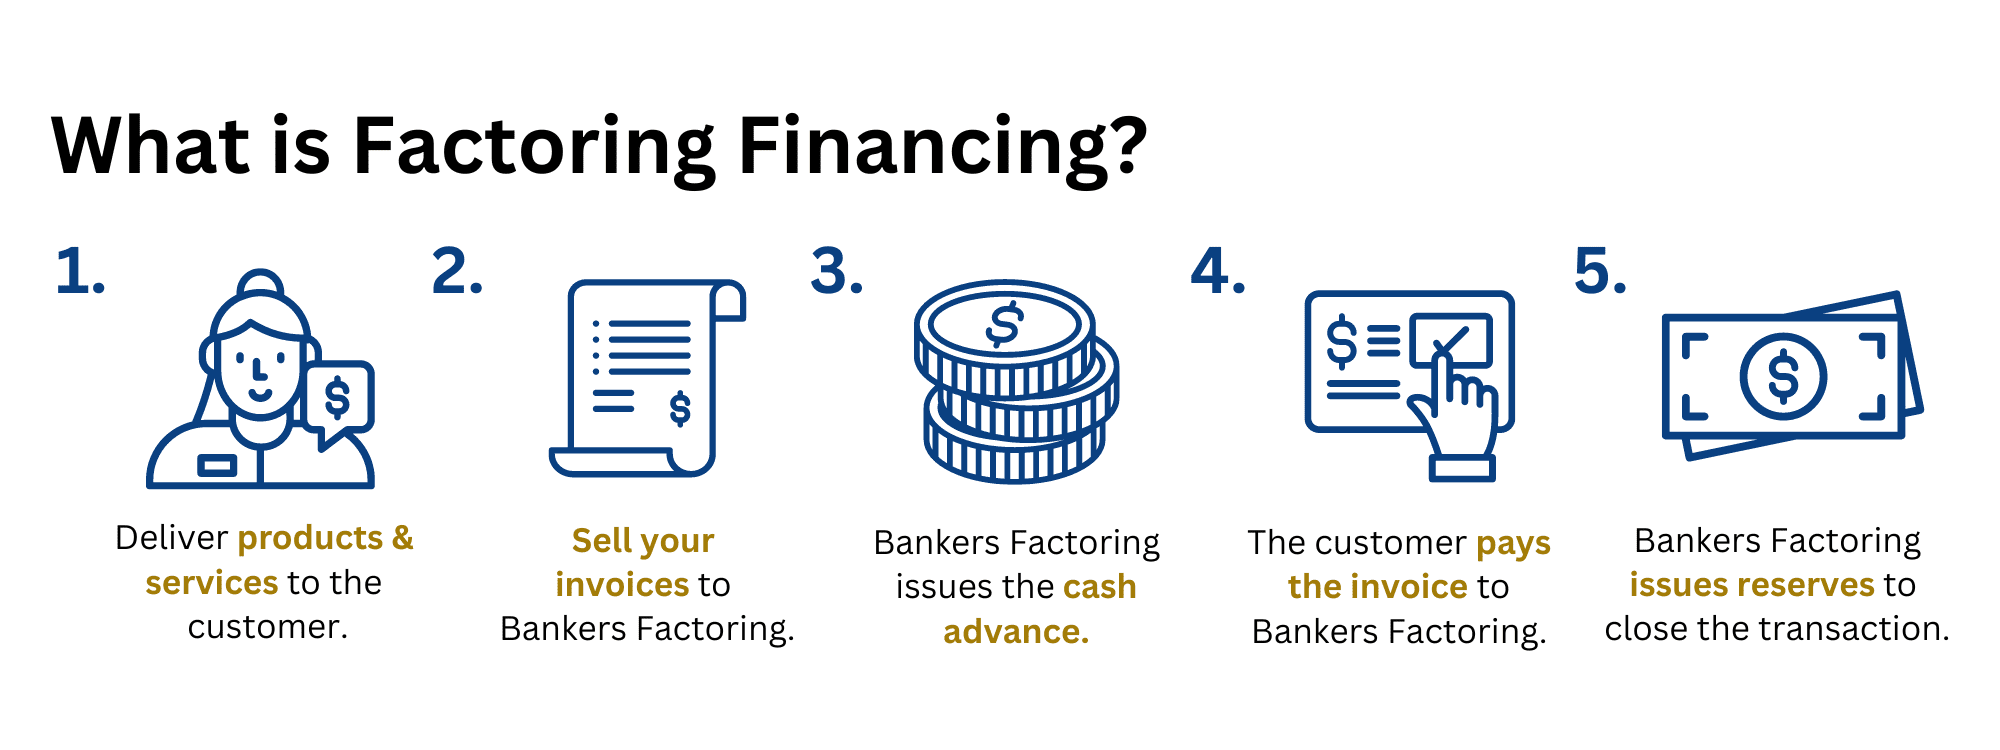 What is Factor Finance?